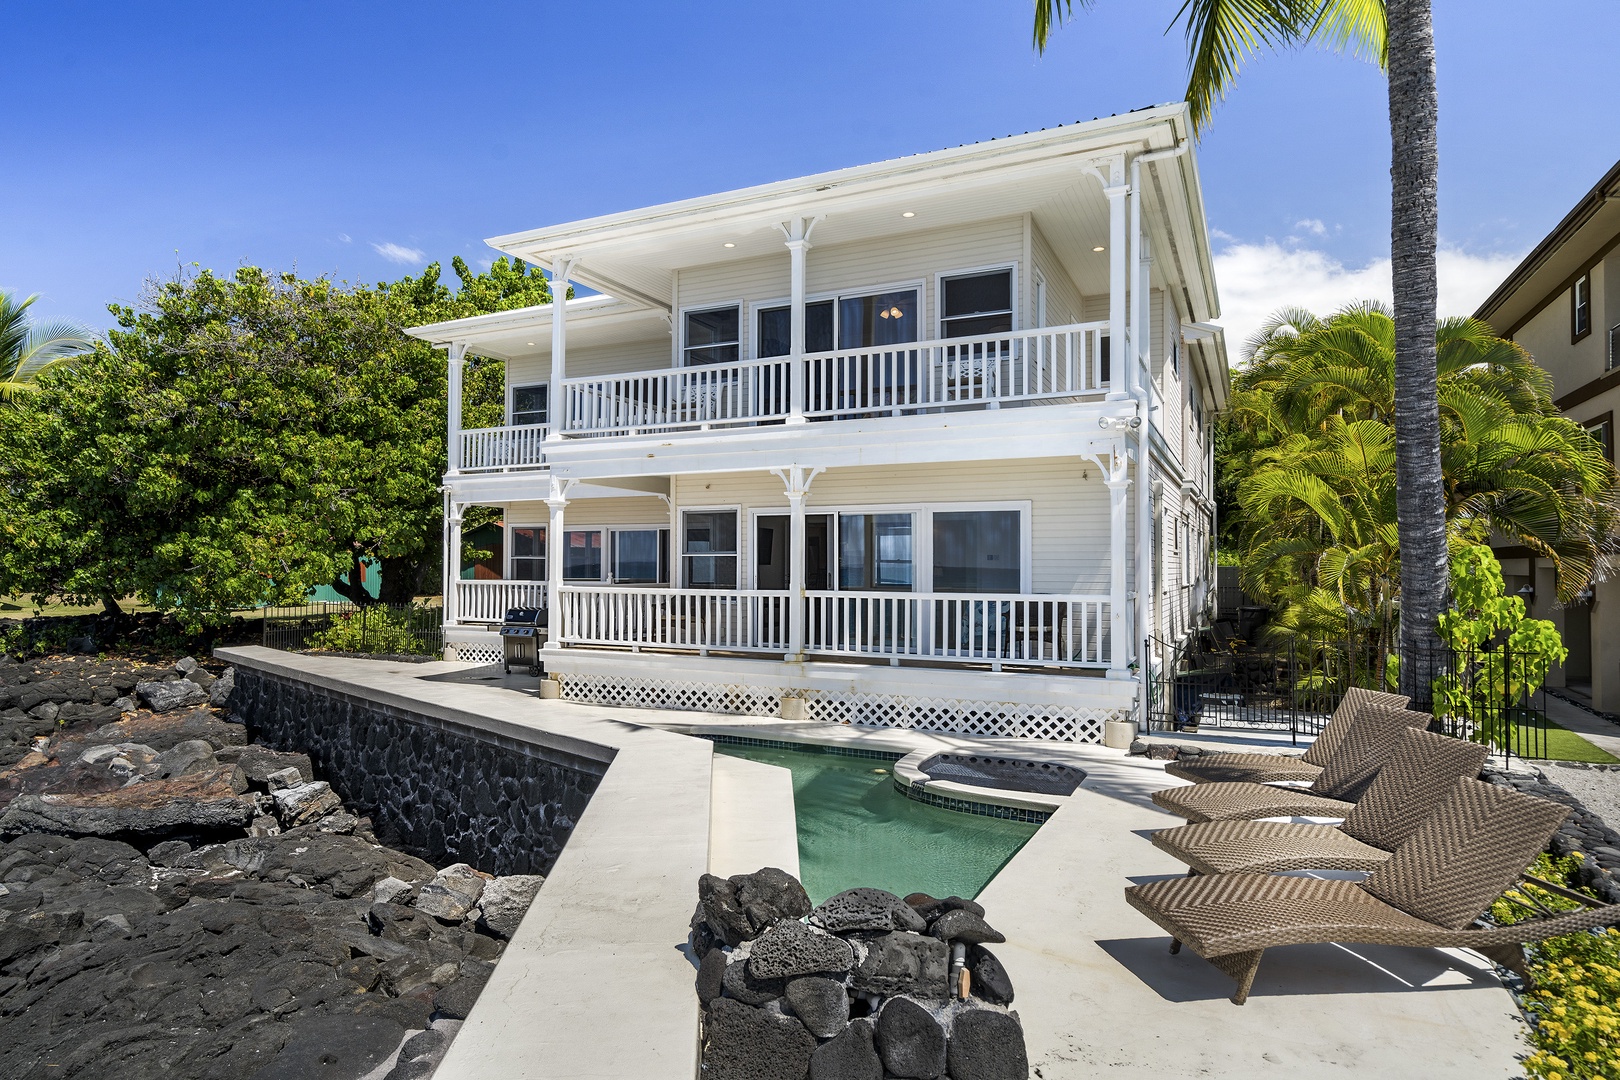 Kailua Kona Vacation Rentals, Dolphin Manor - No better place to call home while visiting the Big Island!